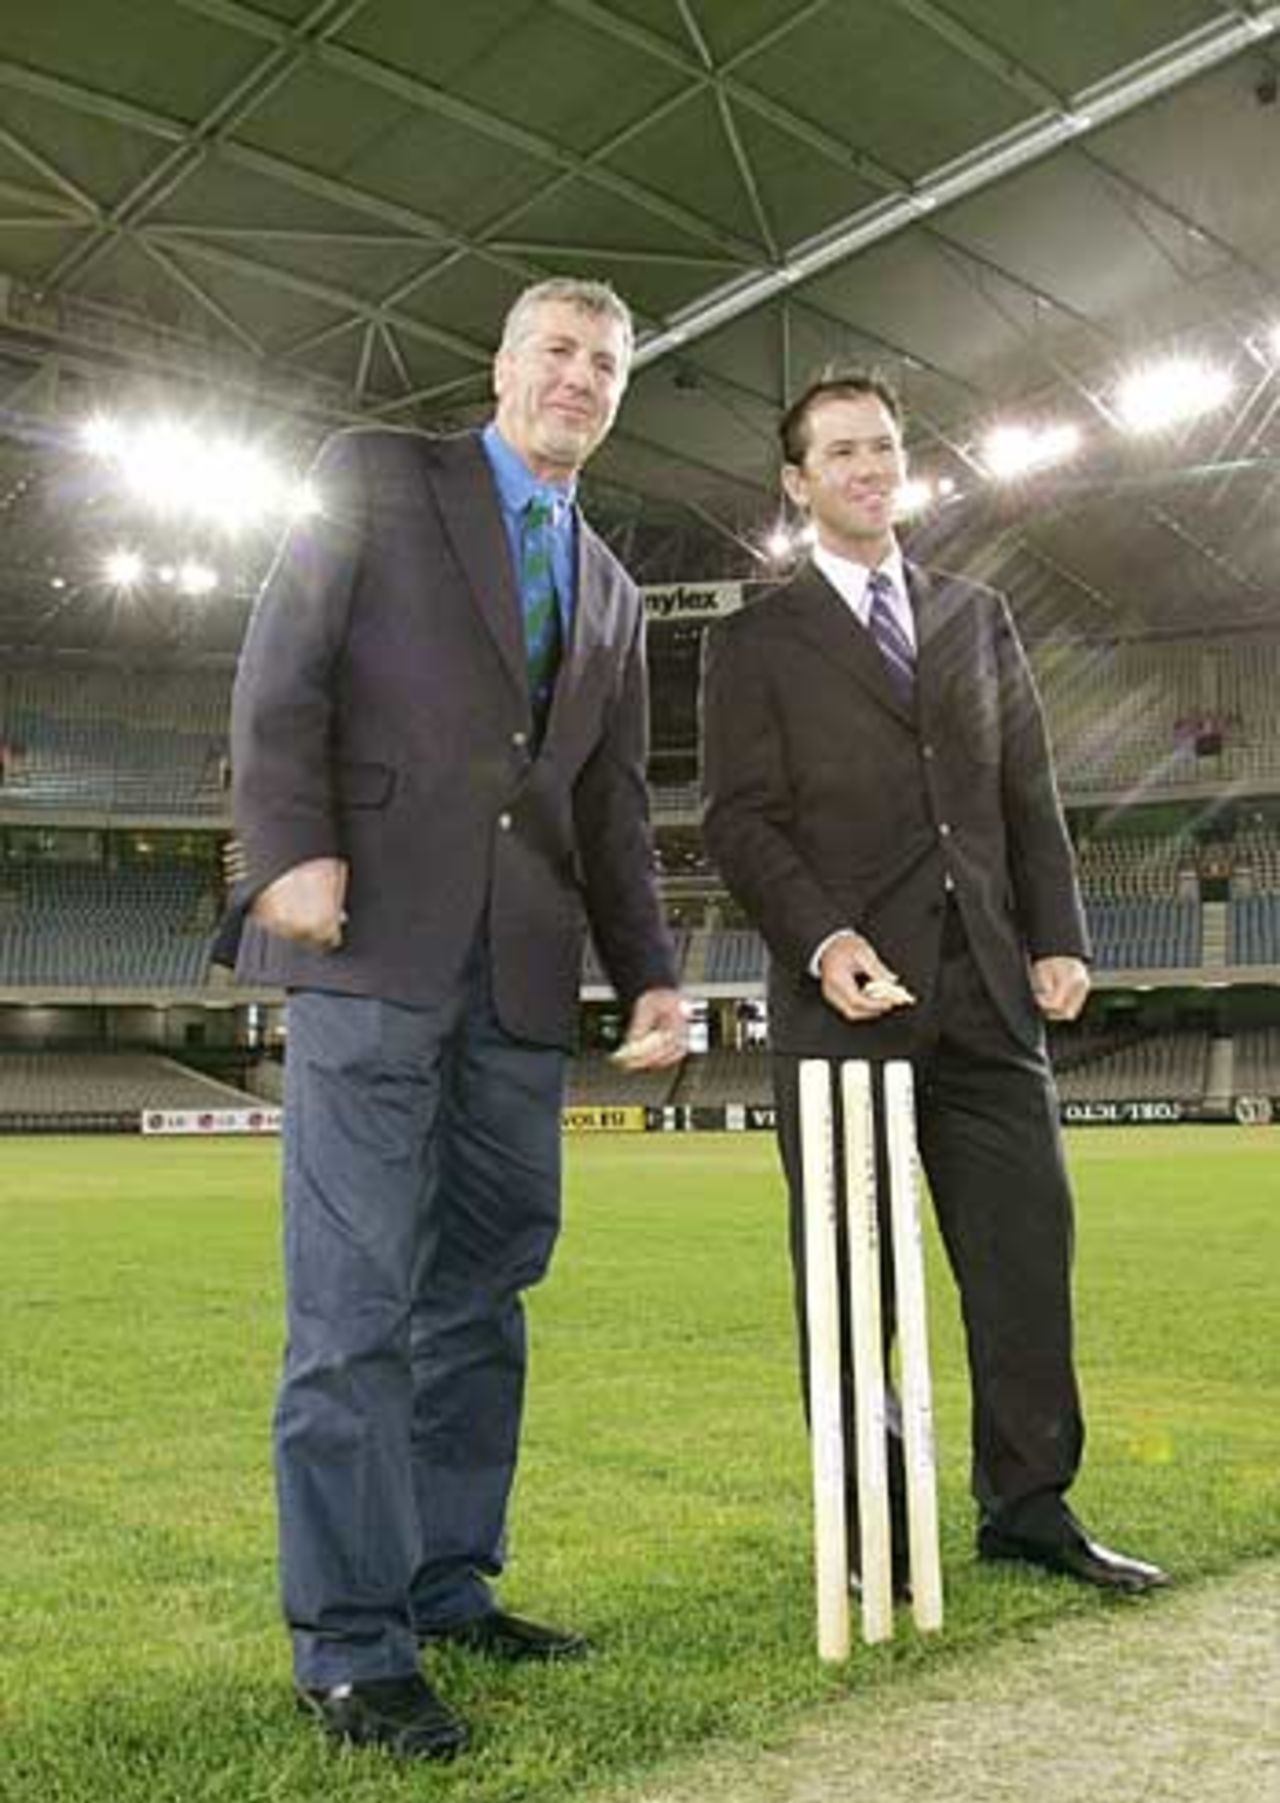 Ricky Ponting and John Wright inspect the Telstra Dome wicket where the three Super Series ODIs will be played early next month, Melbourne, September 28, 2005